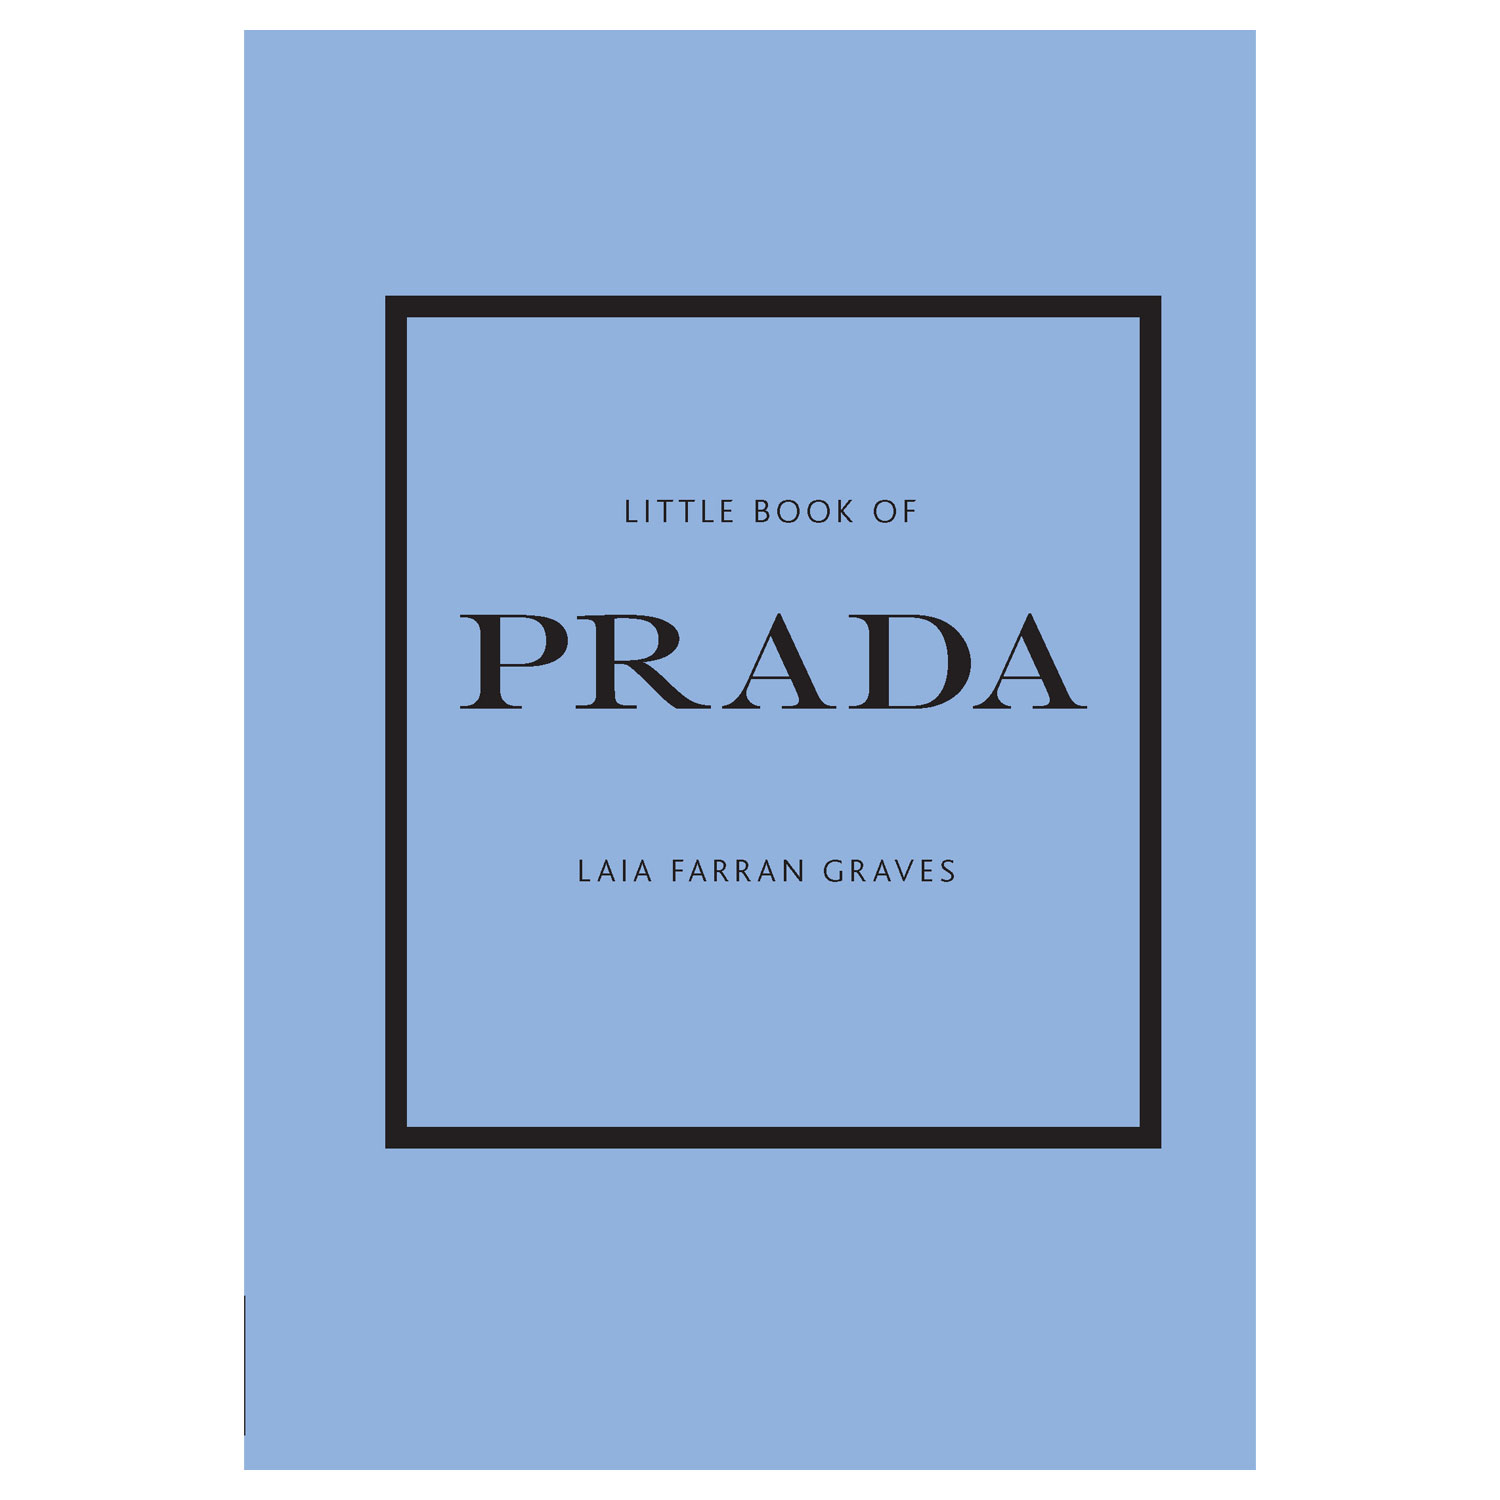 Little Book of Prada by Laia Farran Graves – Manor on George